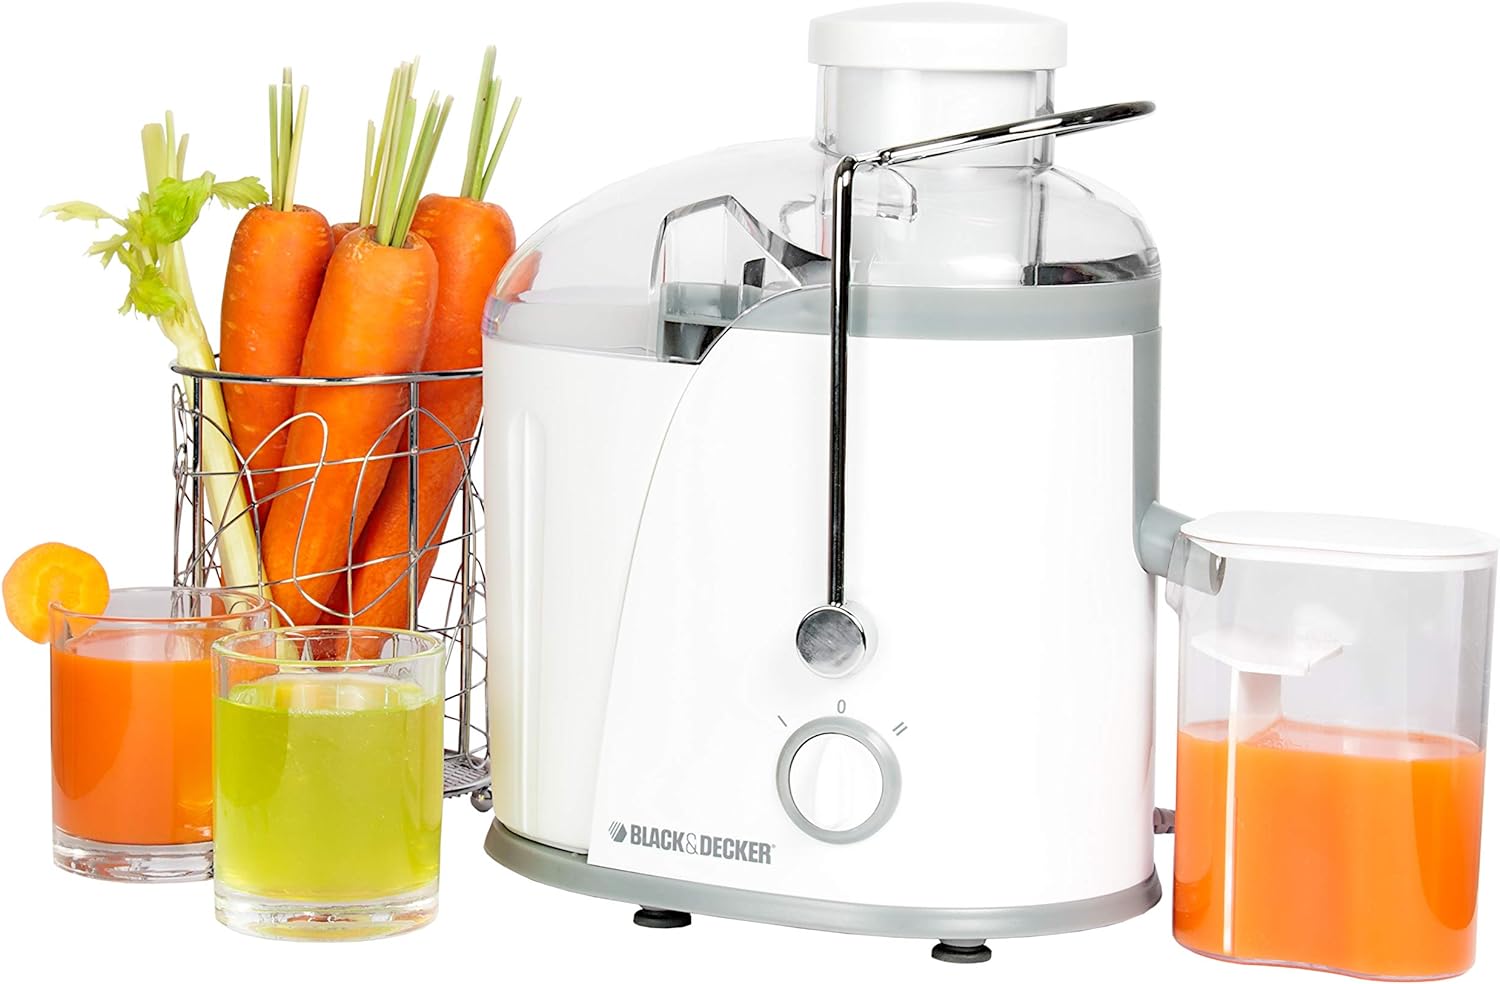 BLACK+DECKER 400w 65mm juice extractor xl feeding chute 1.3l large pulp container, 350ml collector, stainless steel filter, for juicing fruits&vegetables easily je400-b5